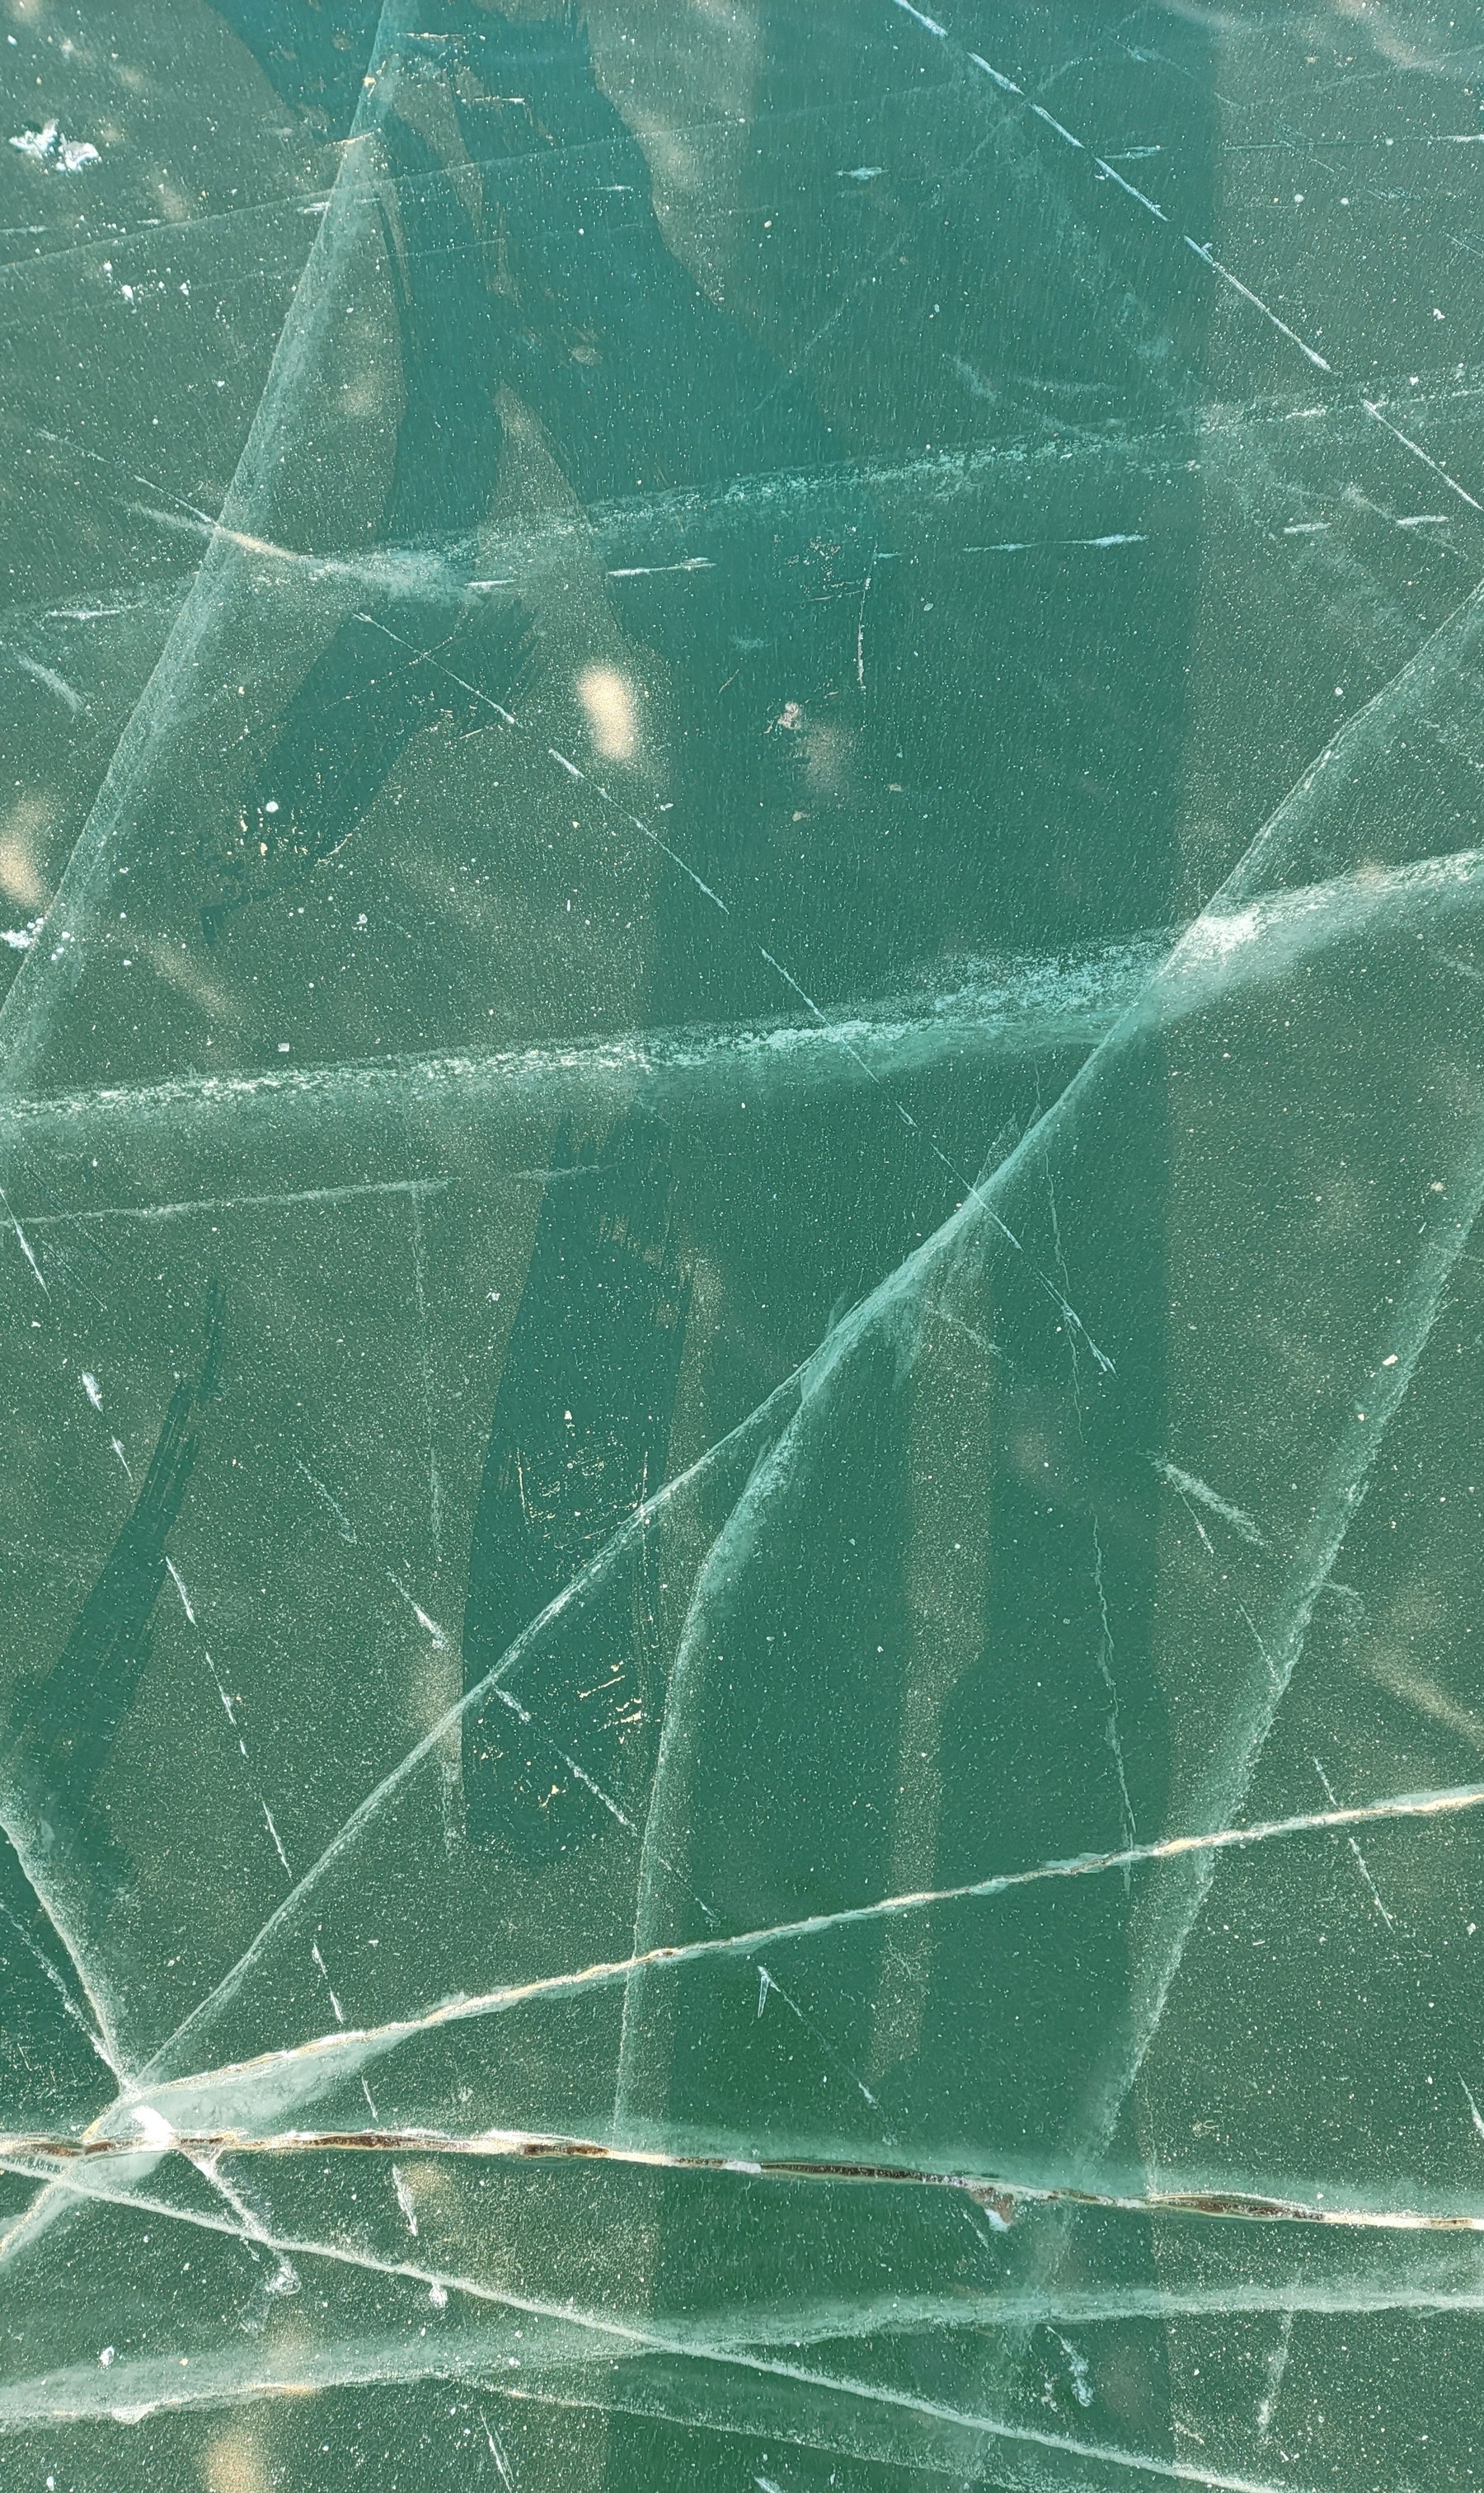 ice with ski mark cracks running through it; teal water underneath